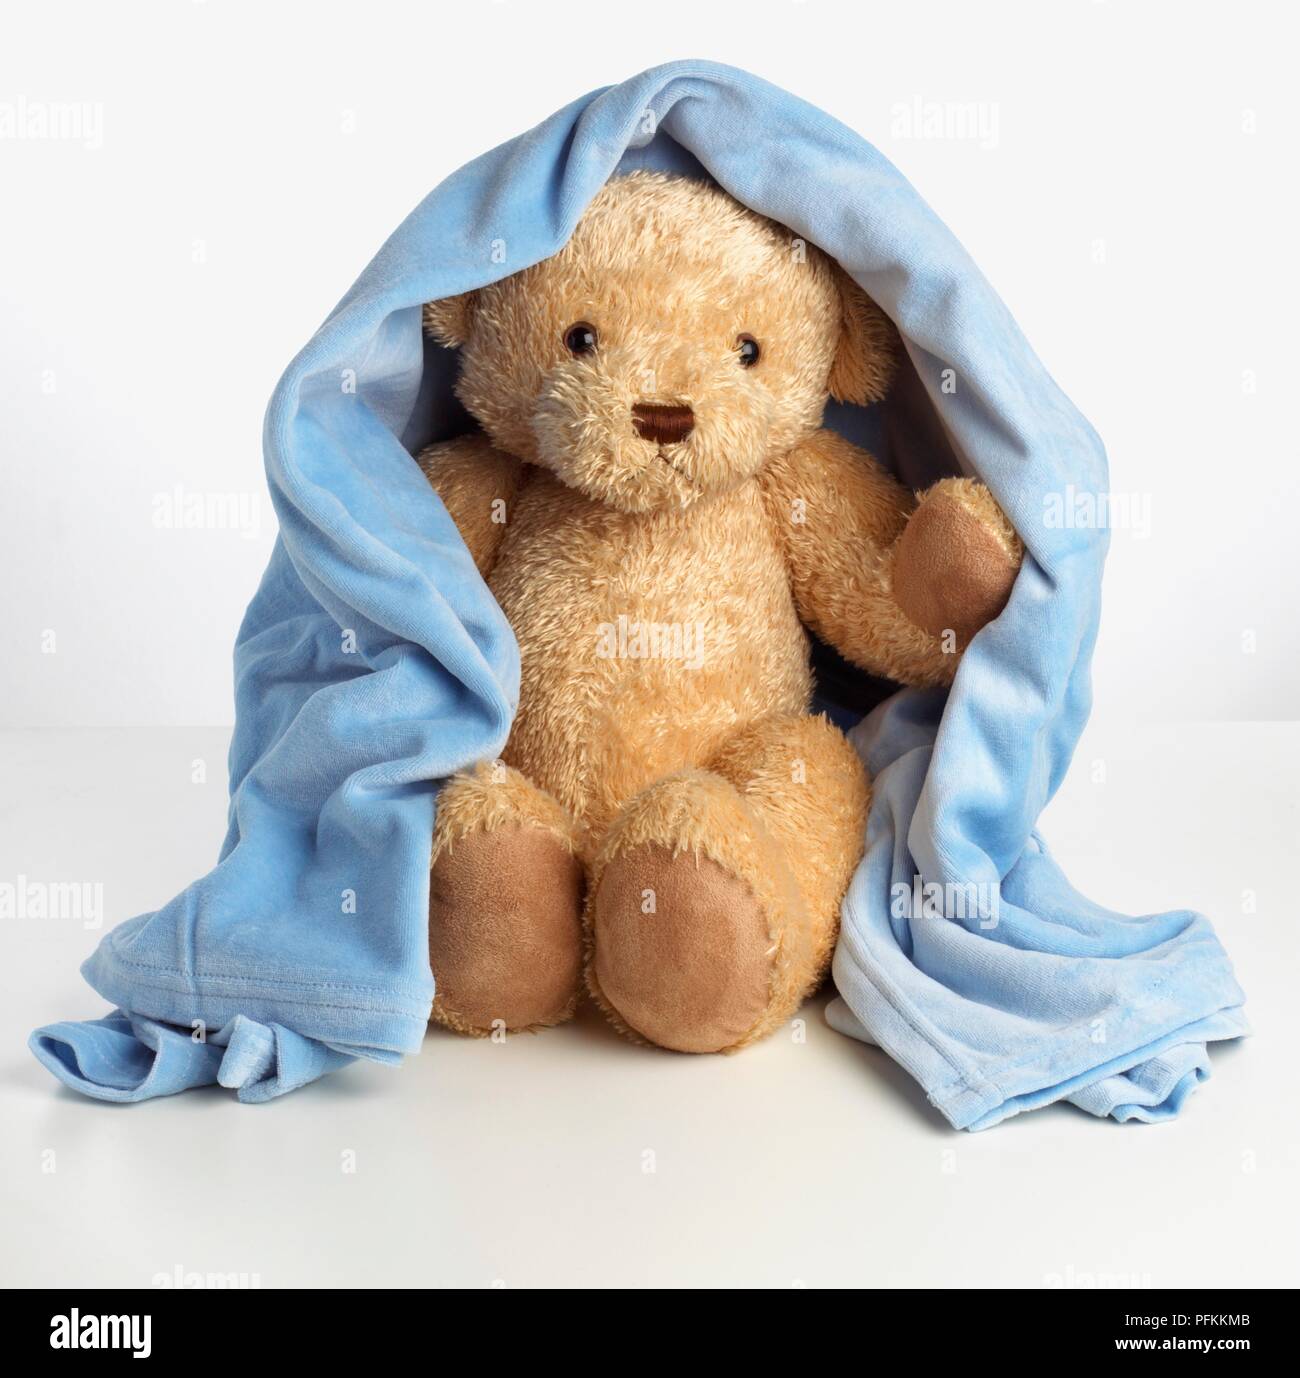 A teddy bear covered with a blue blanket Stock Photo